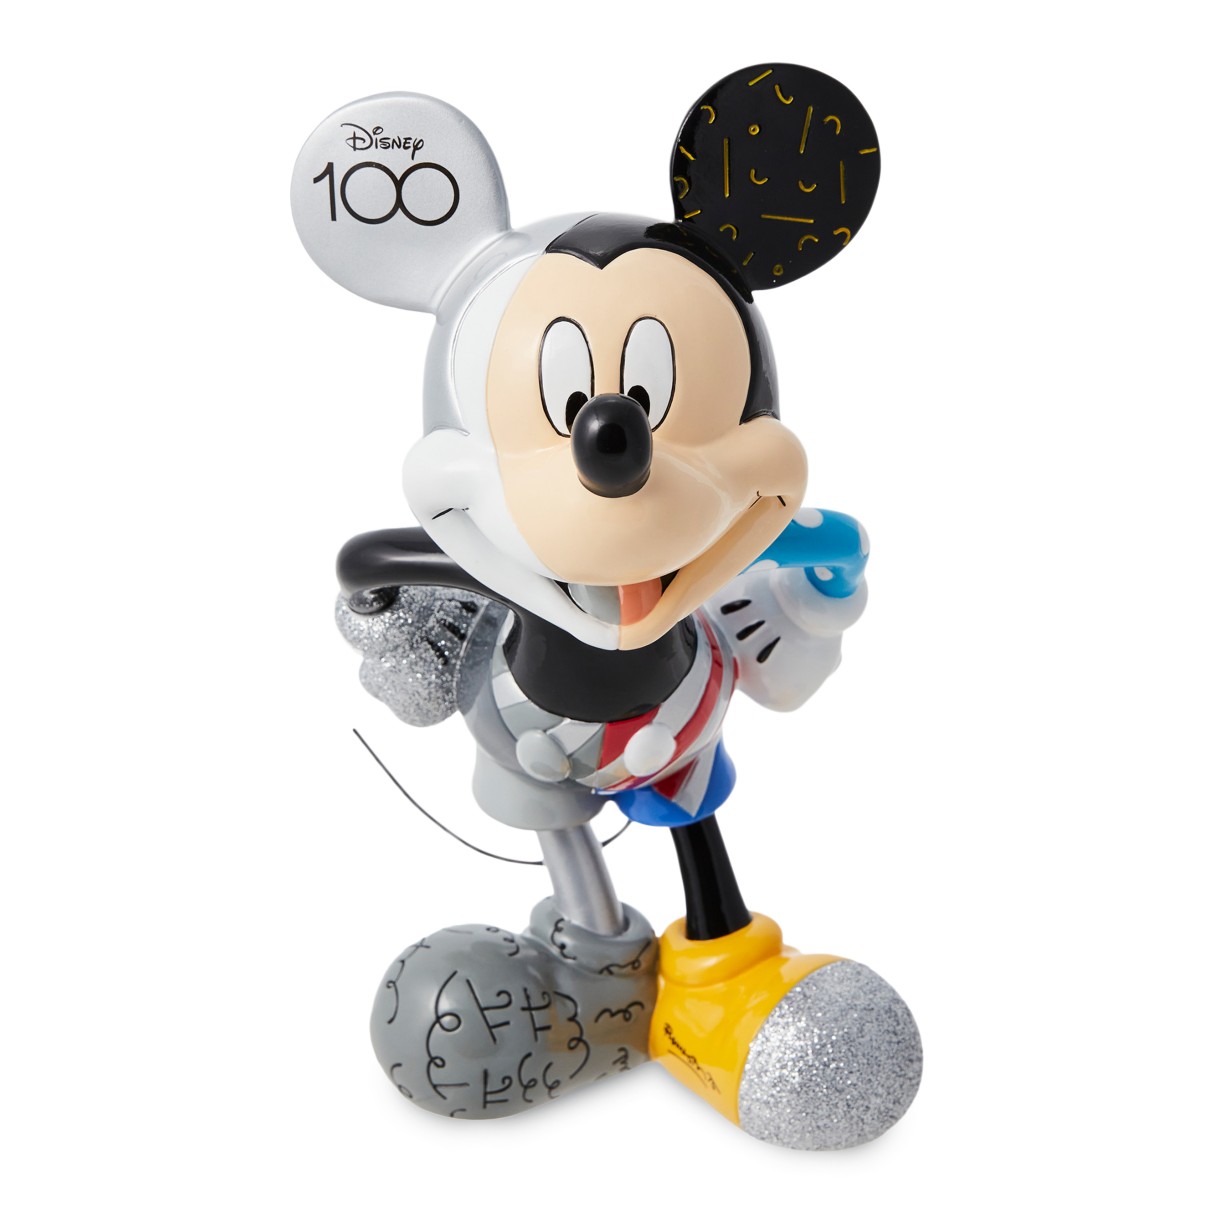 Mickey Mouse Figure by Britto – Disney100